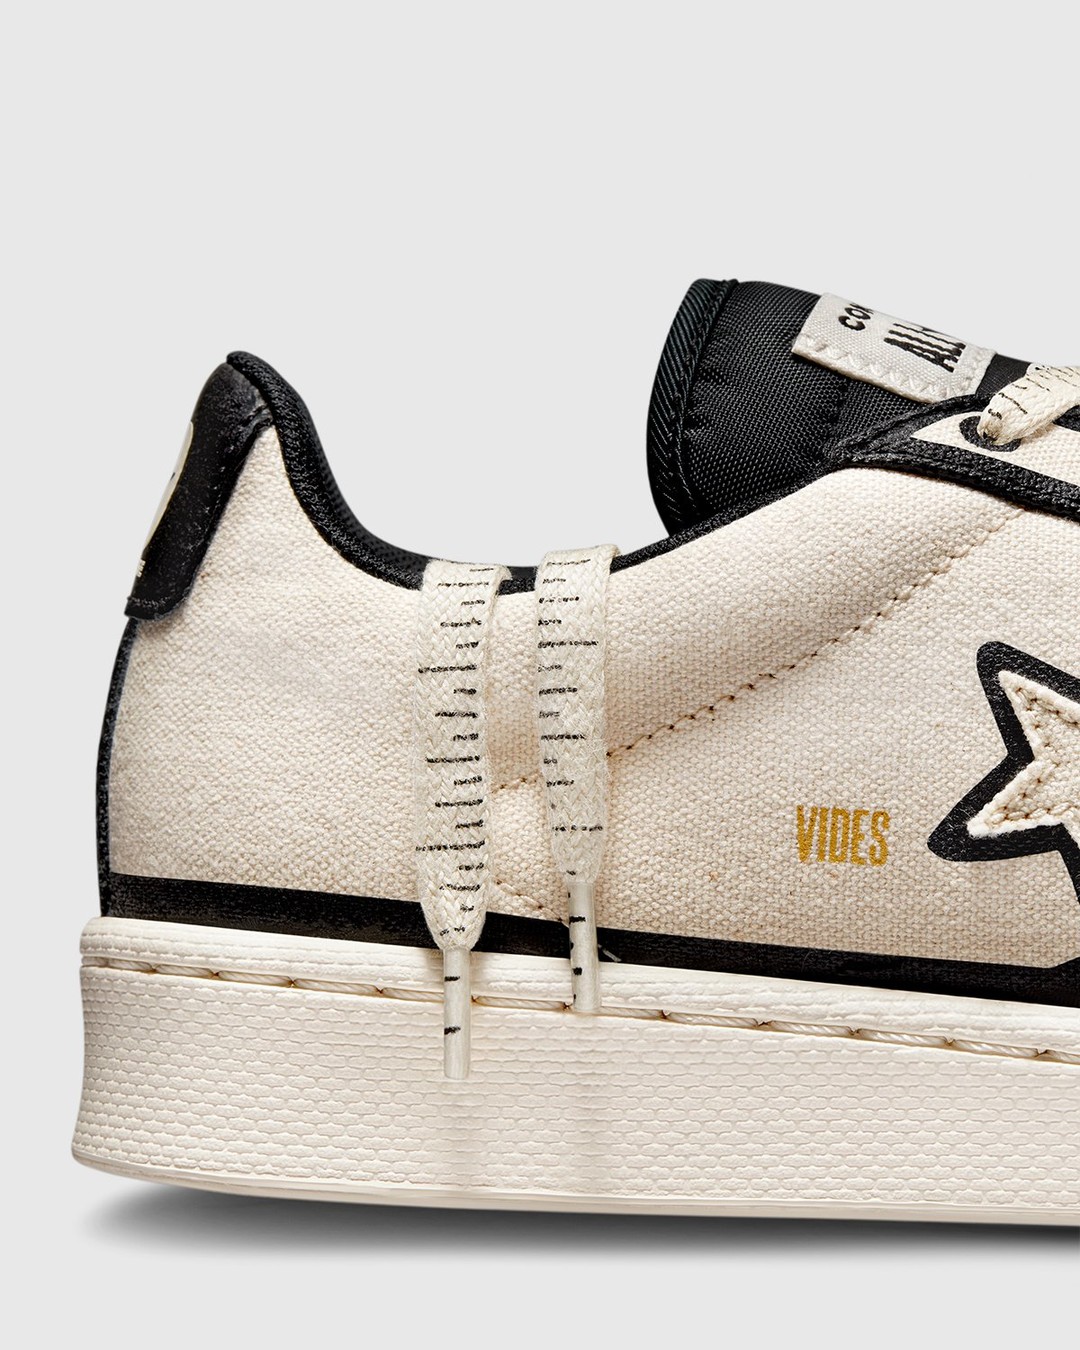 Converse x Joshua Vides – Pro Leather Ox Natural Ivory/Black/White - Low Top Sneakers - White - Image 8